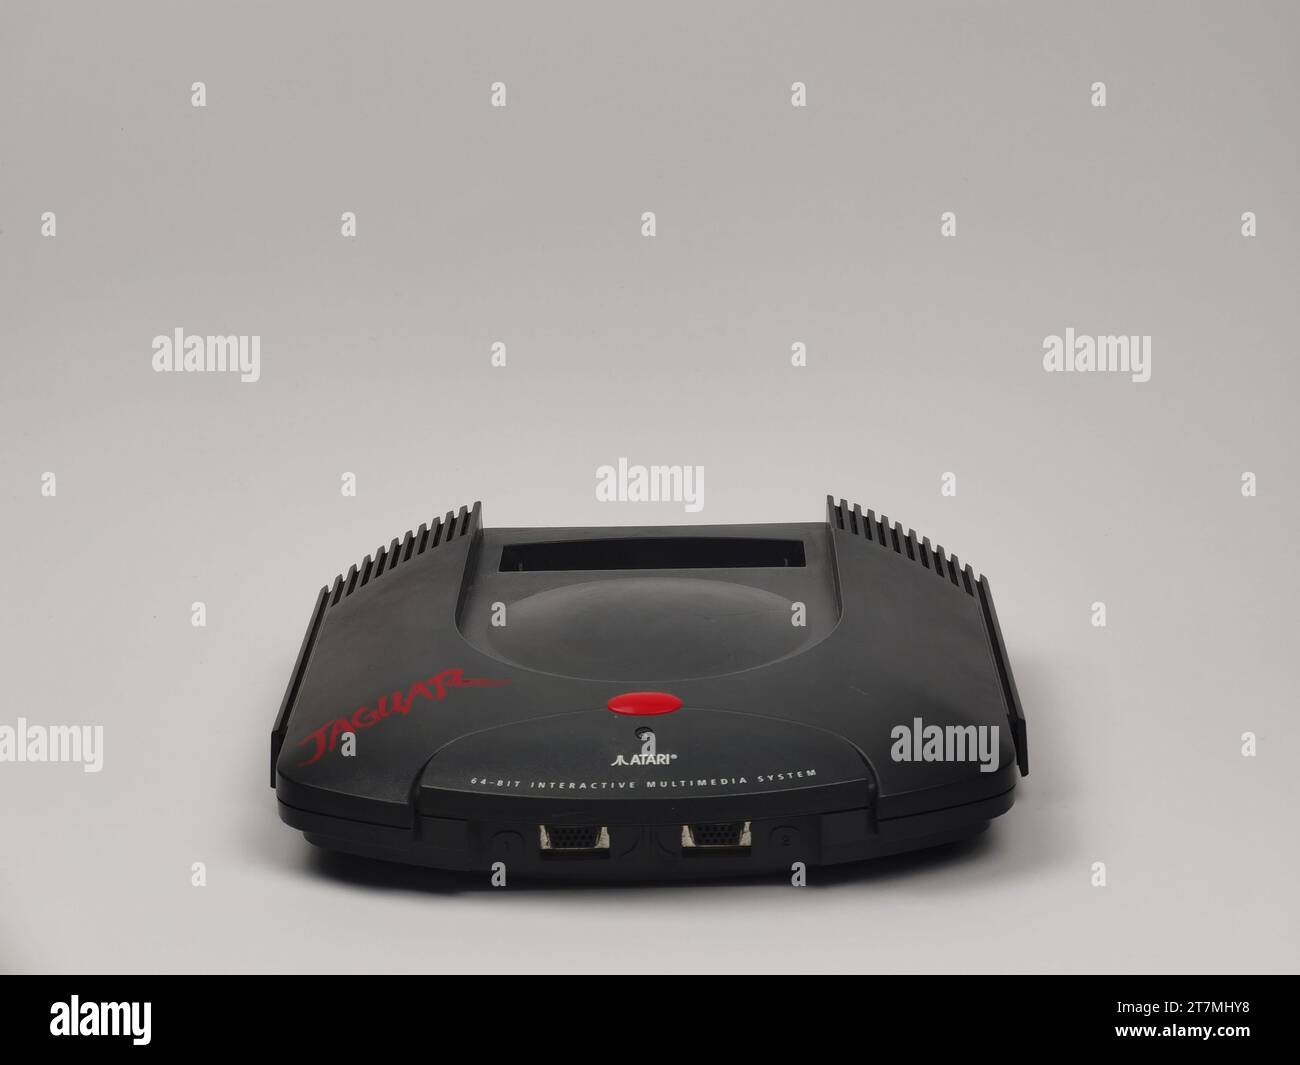 An image of an Atari Jaguar retro gaming system, the front facing the camera, set against a stark white background Stock Photo